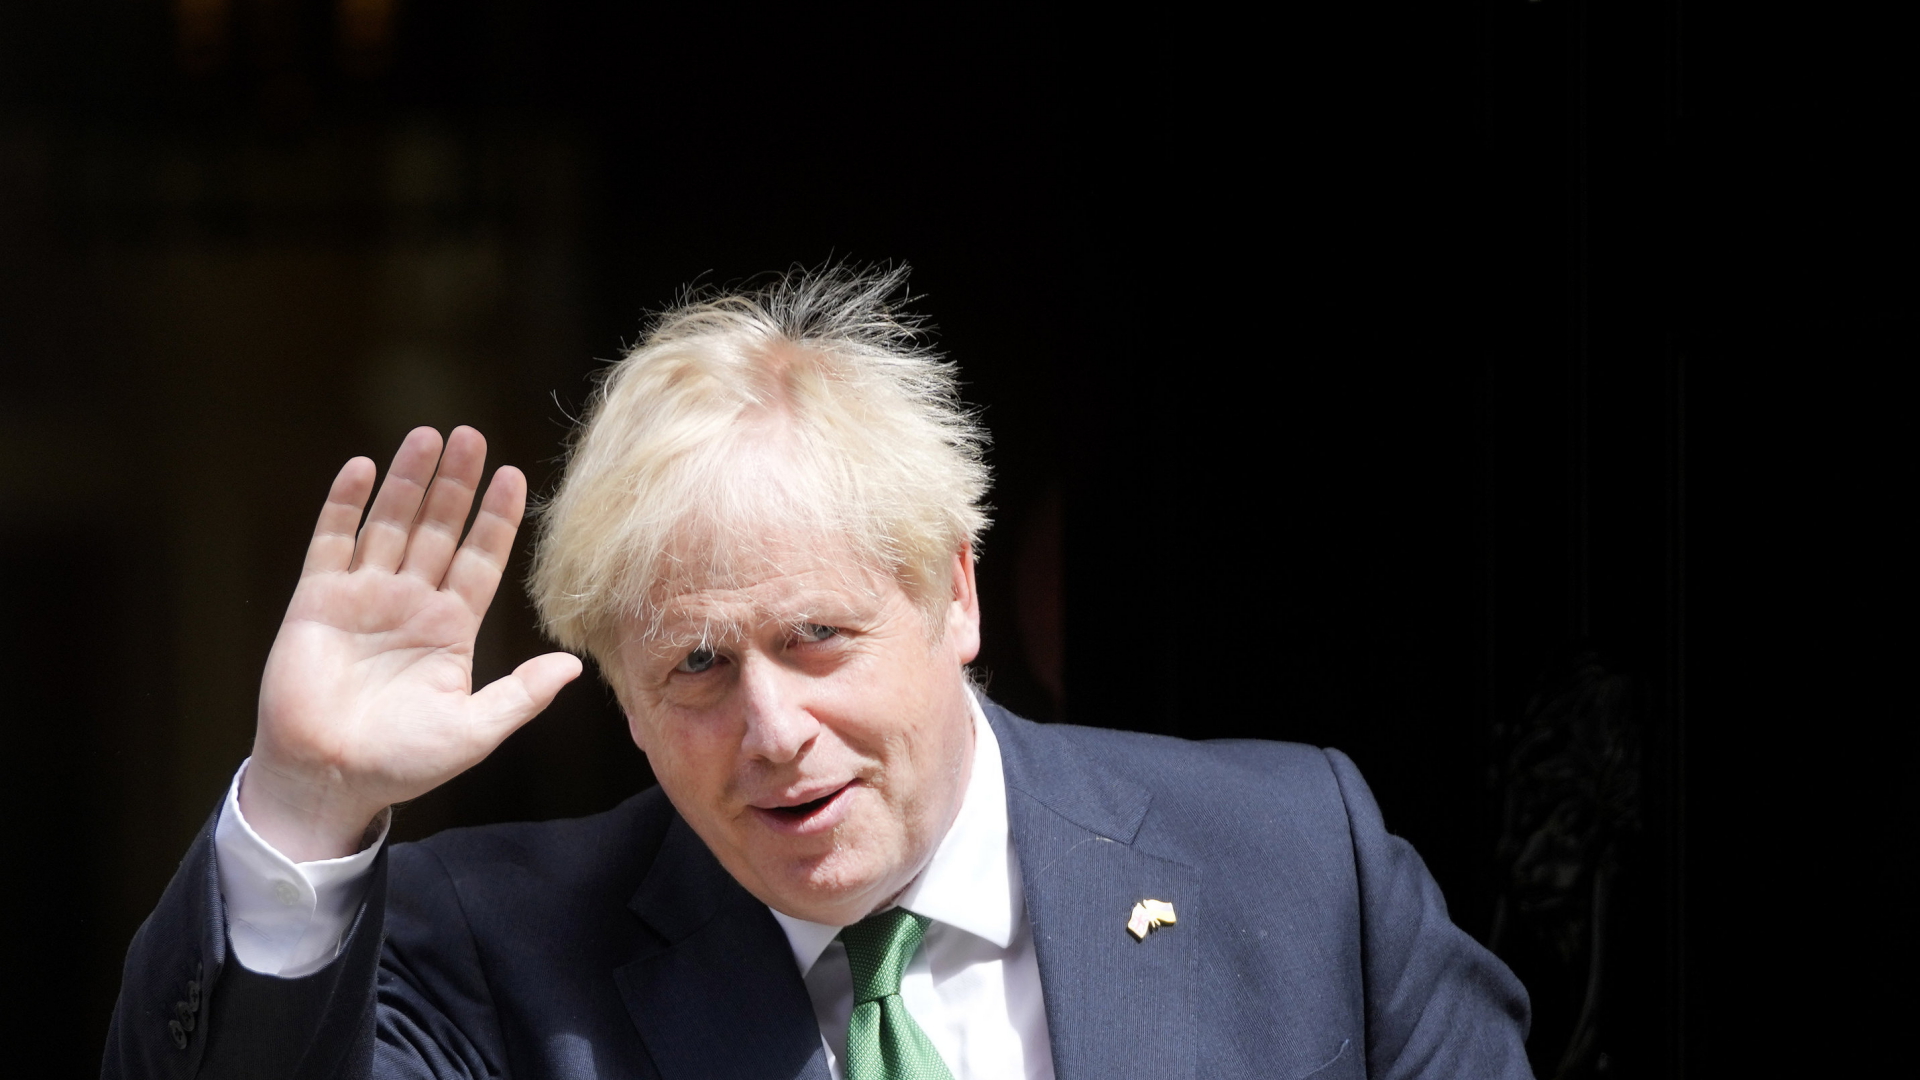 Prime Minister search in Great Britain: Johnson may have support for candidacy